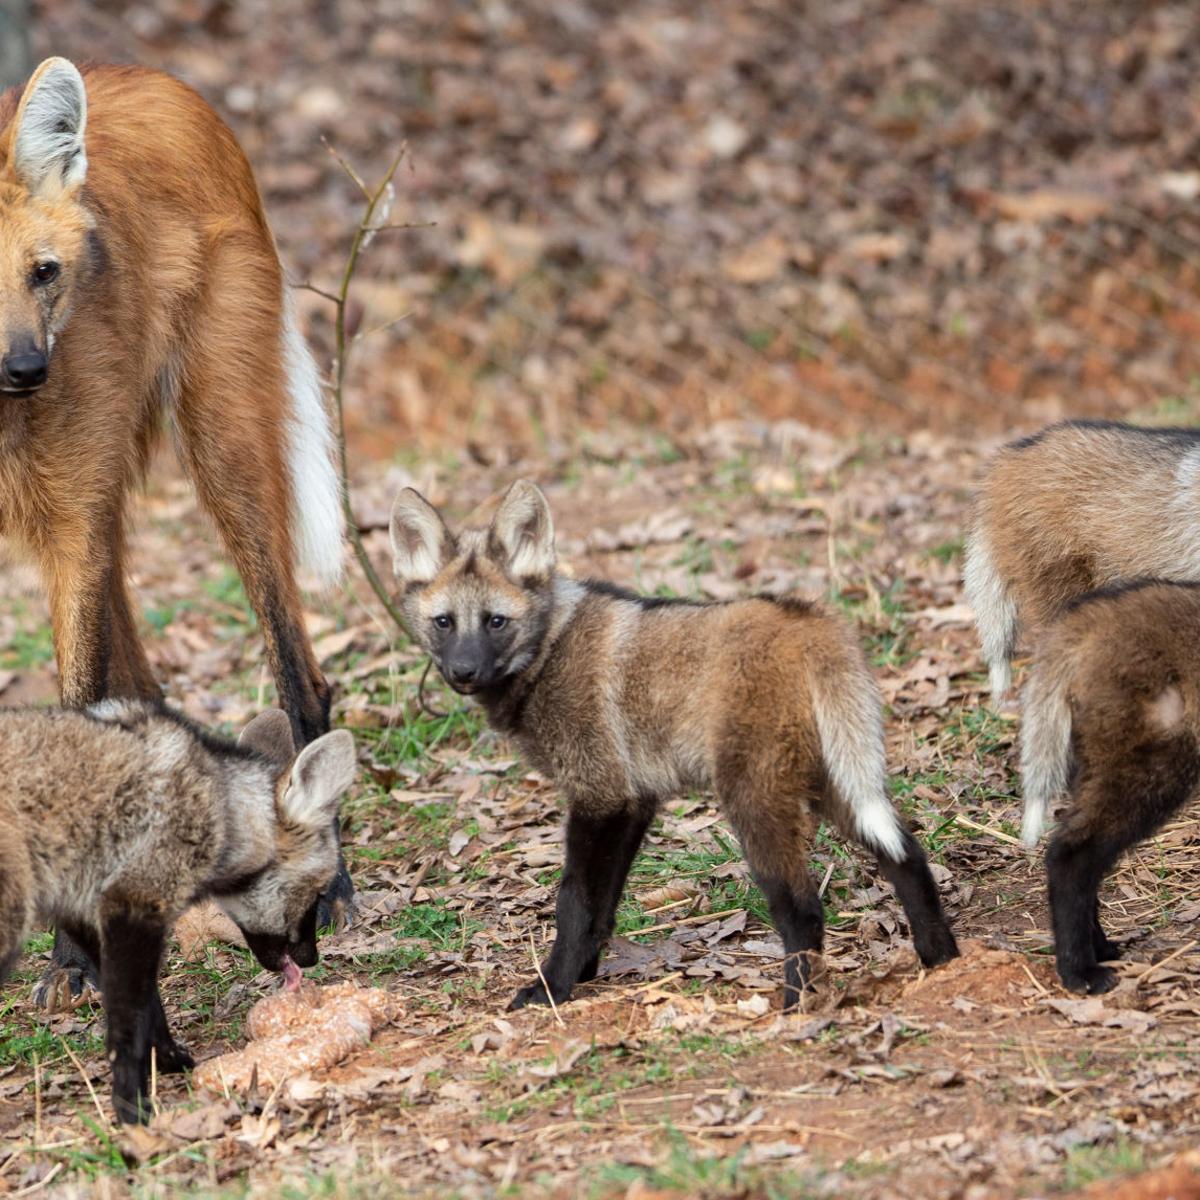 maned wolf pups now have names. What did the Greensboro Science Center choose?